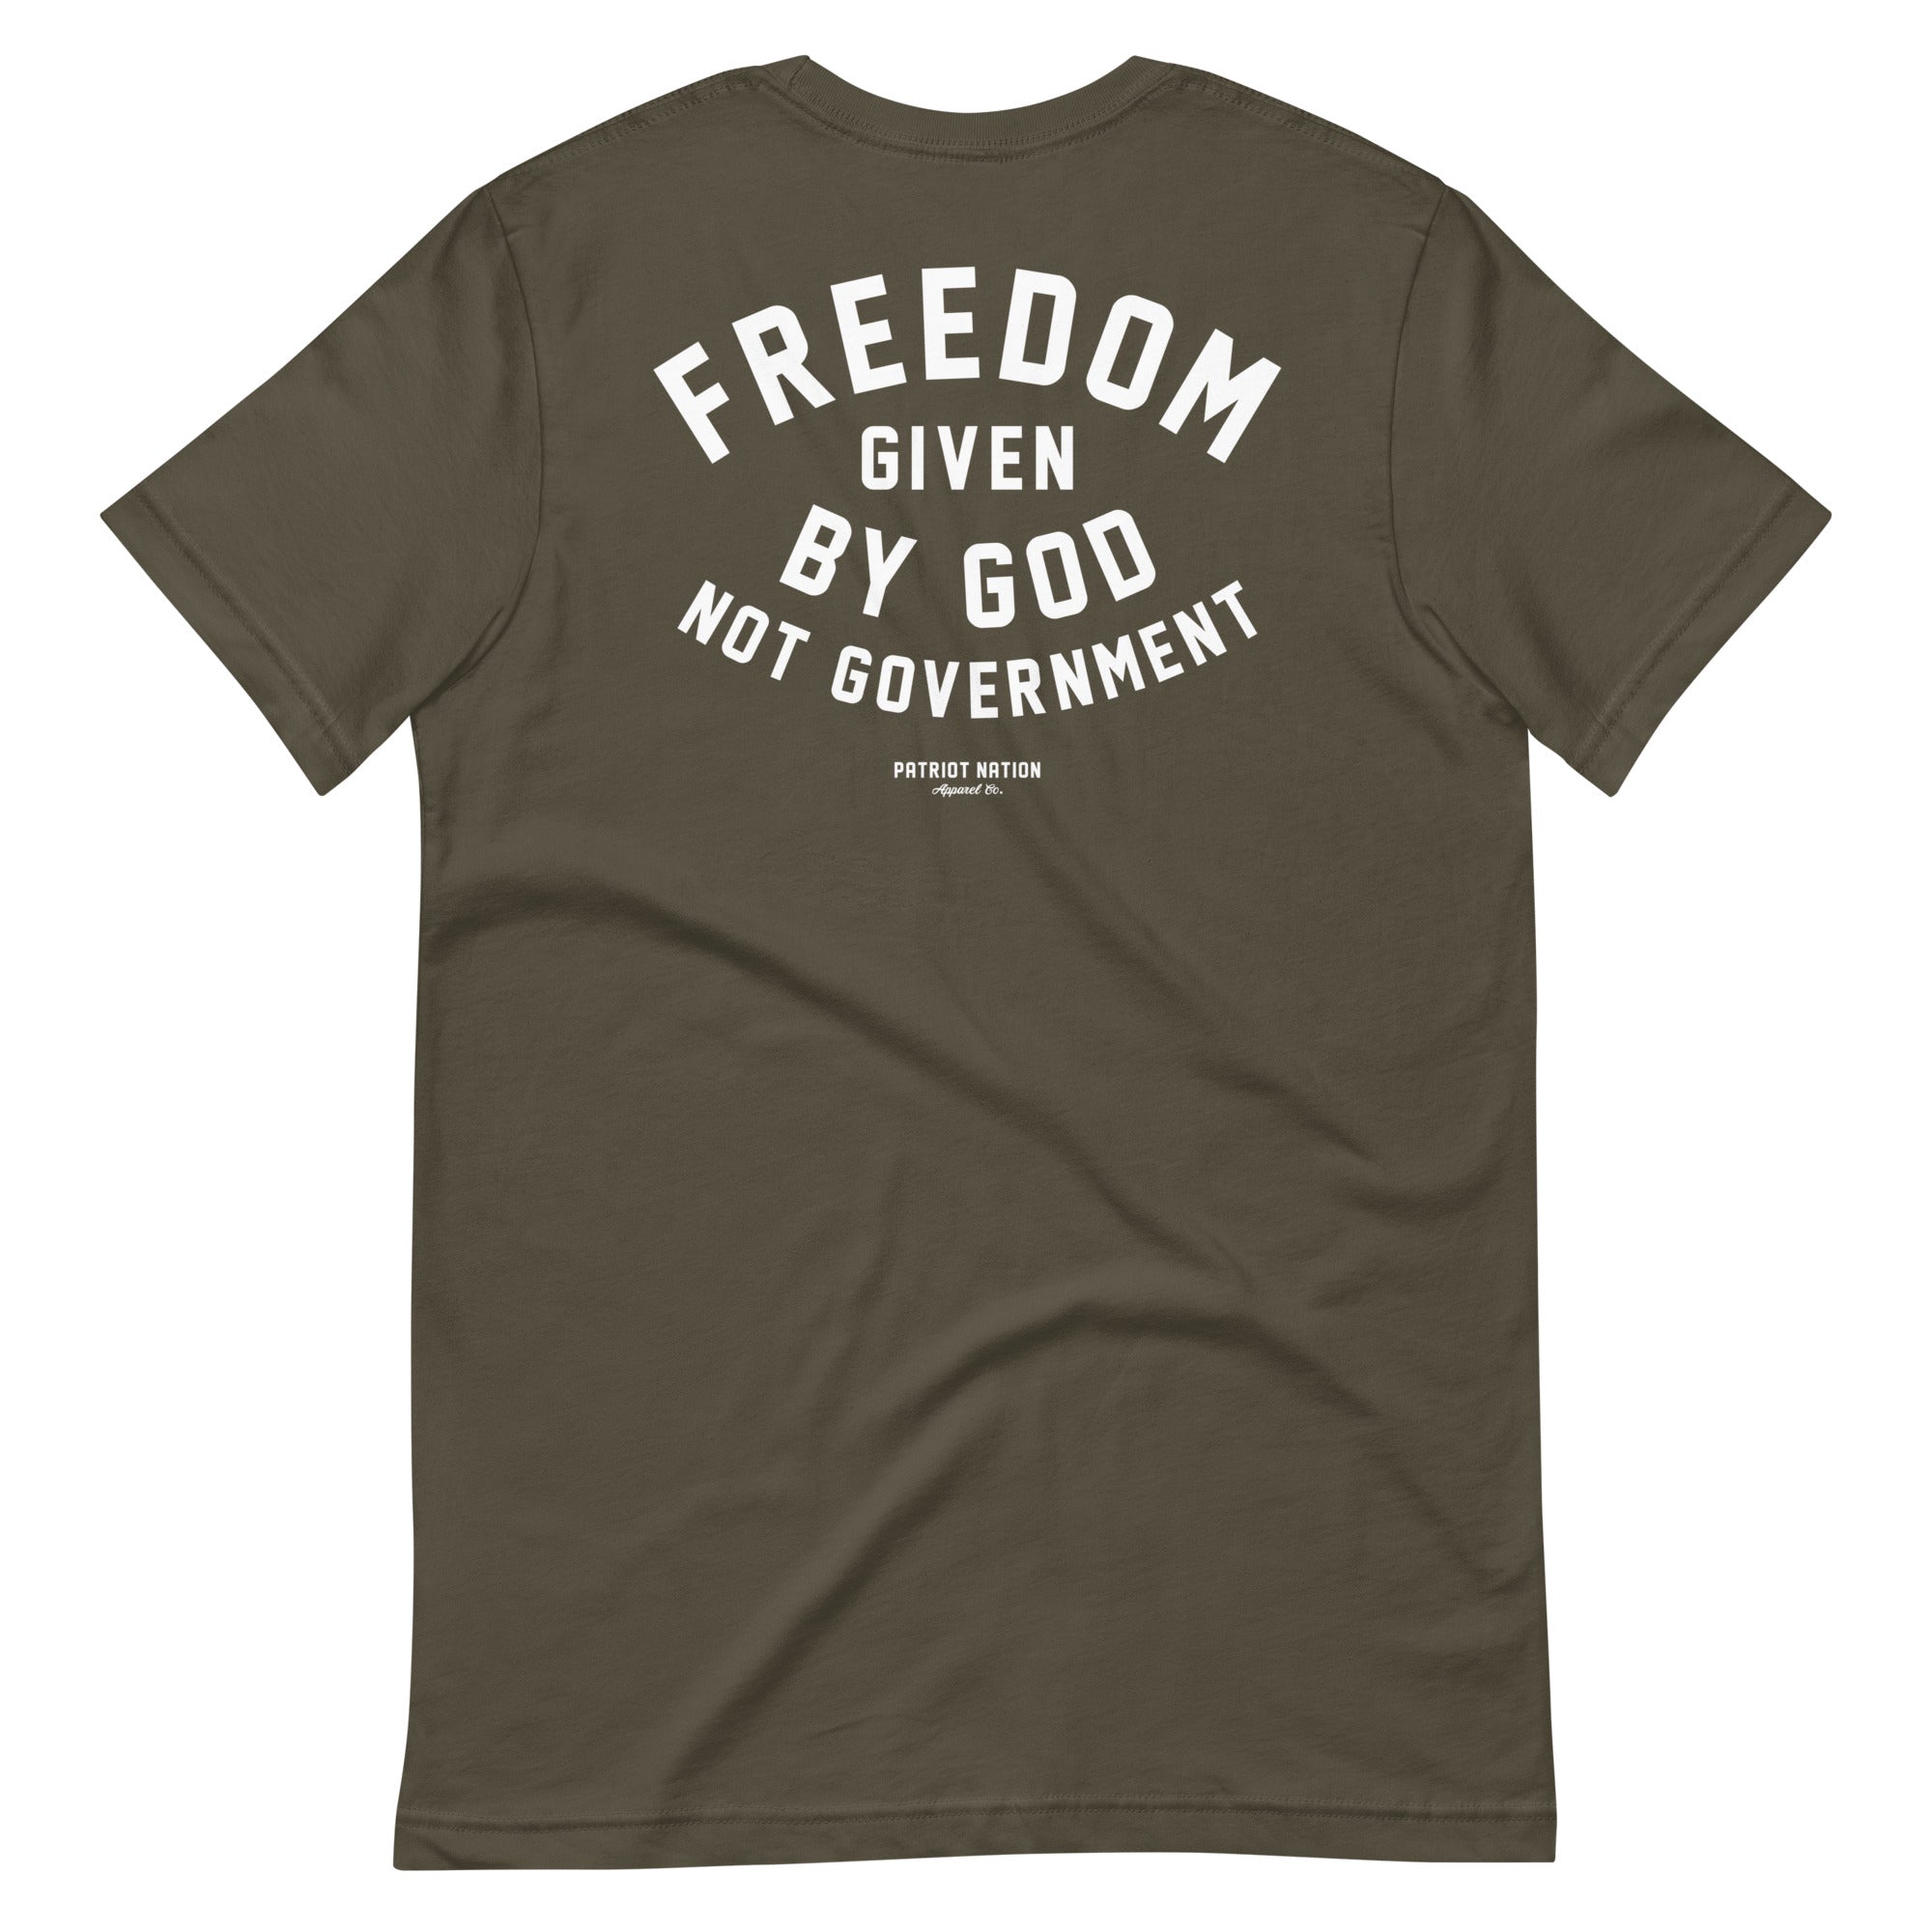 Given by God T-shirt